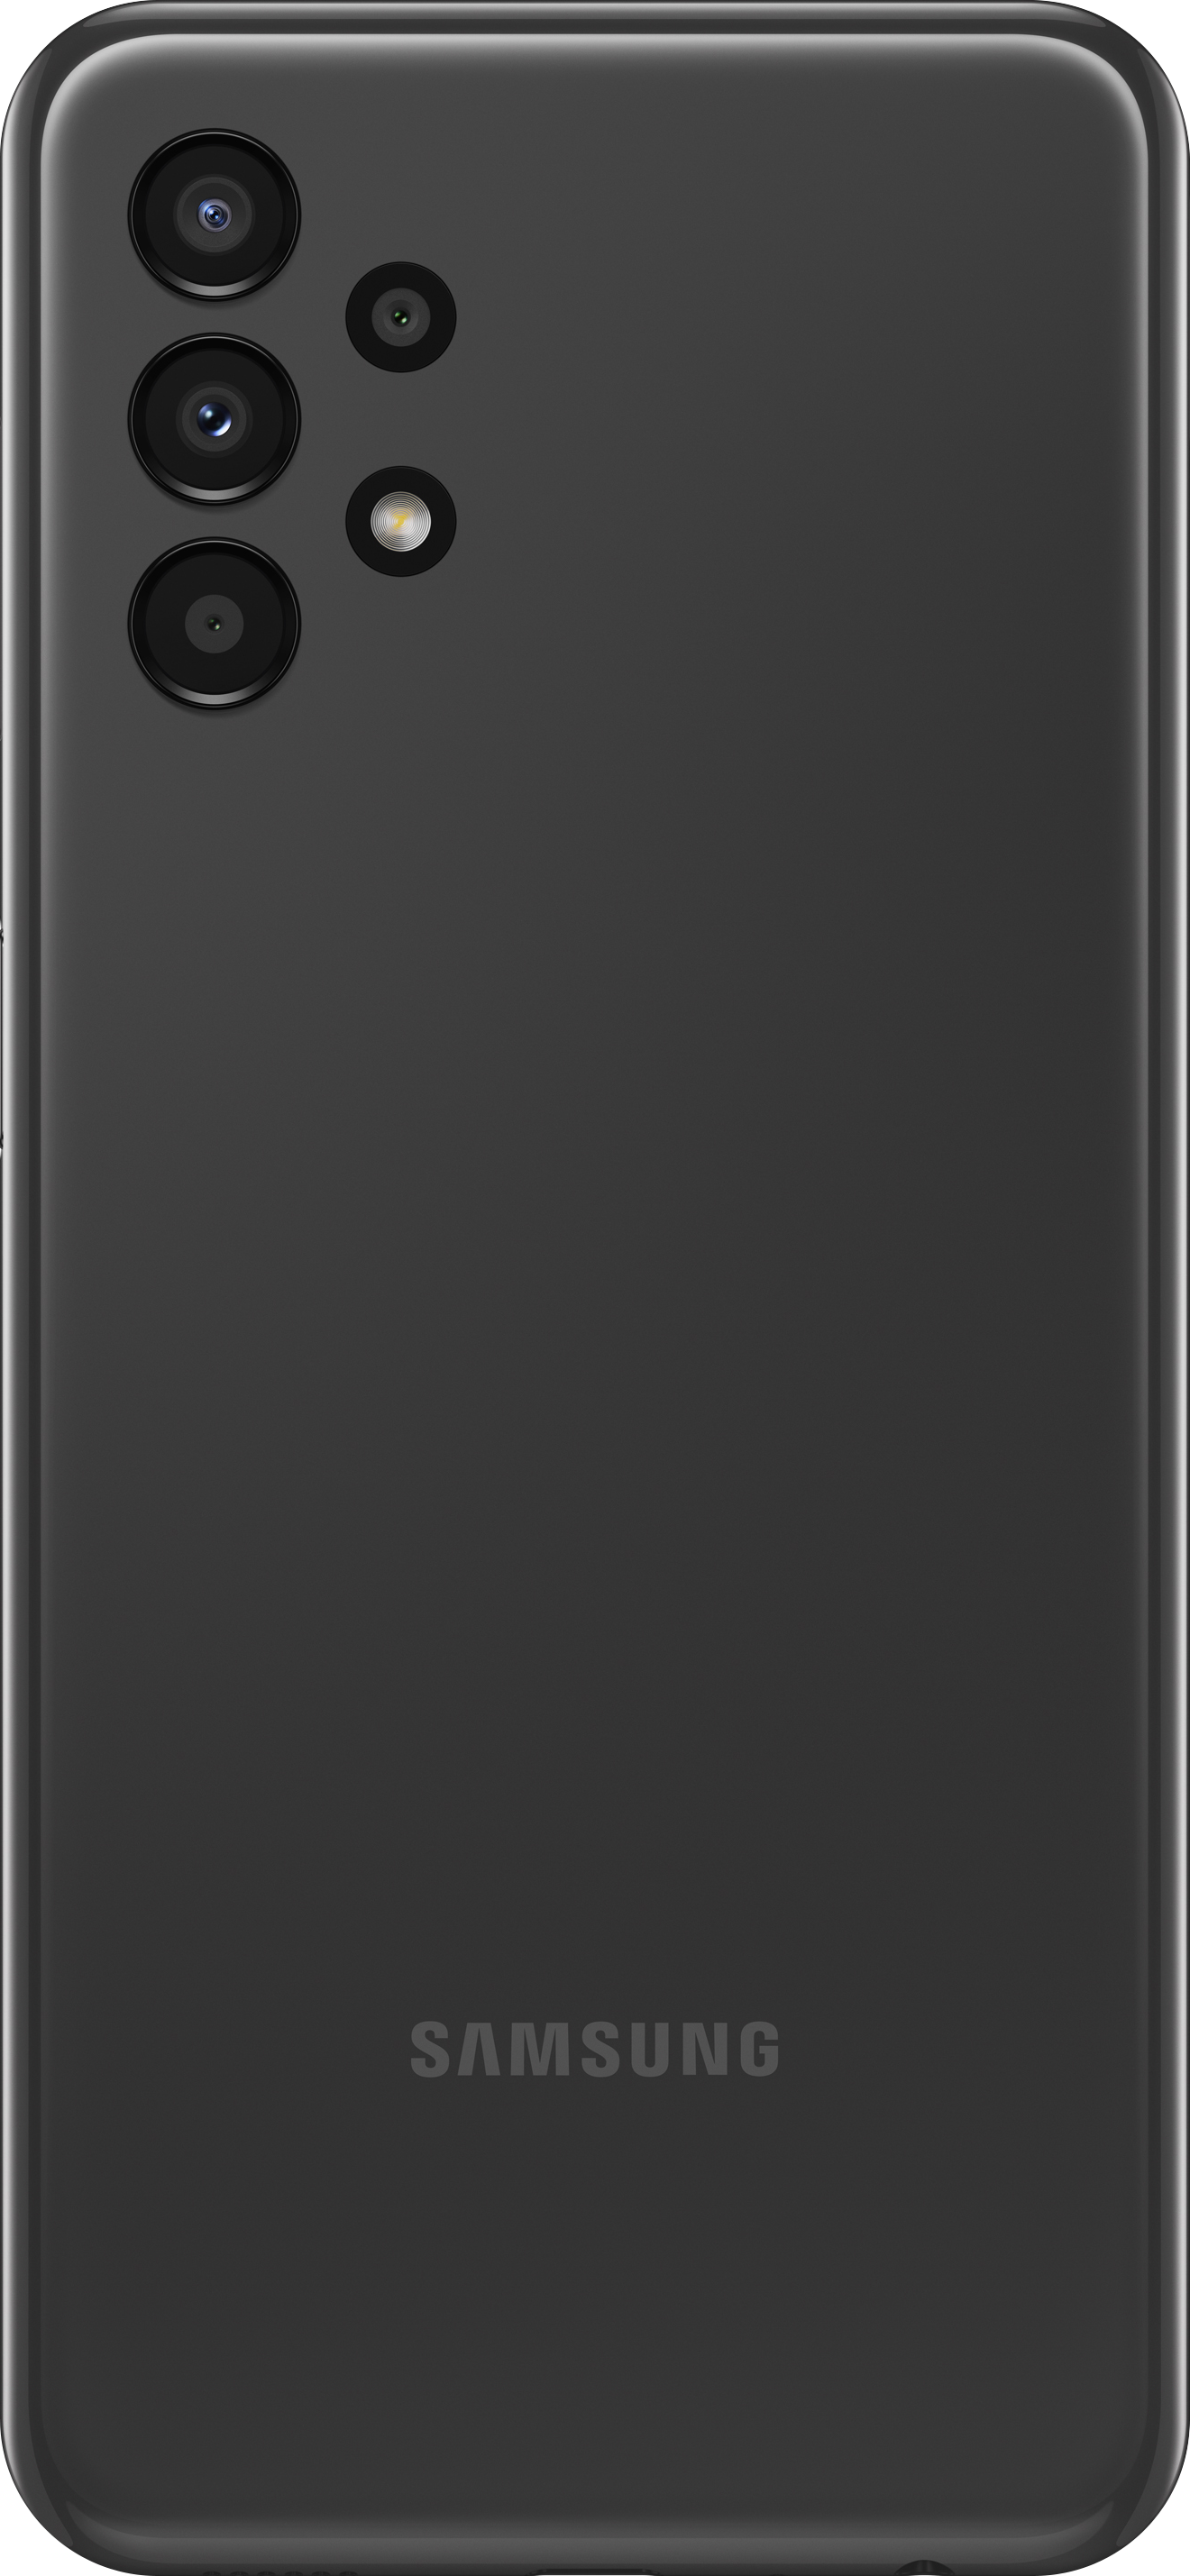 Rear view of A13-Lite phone